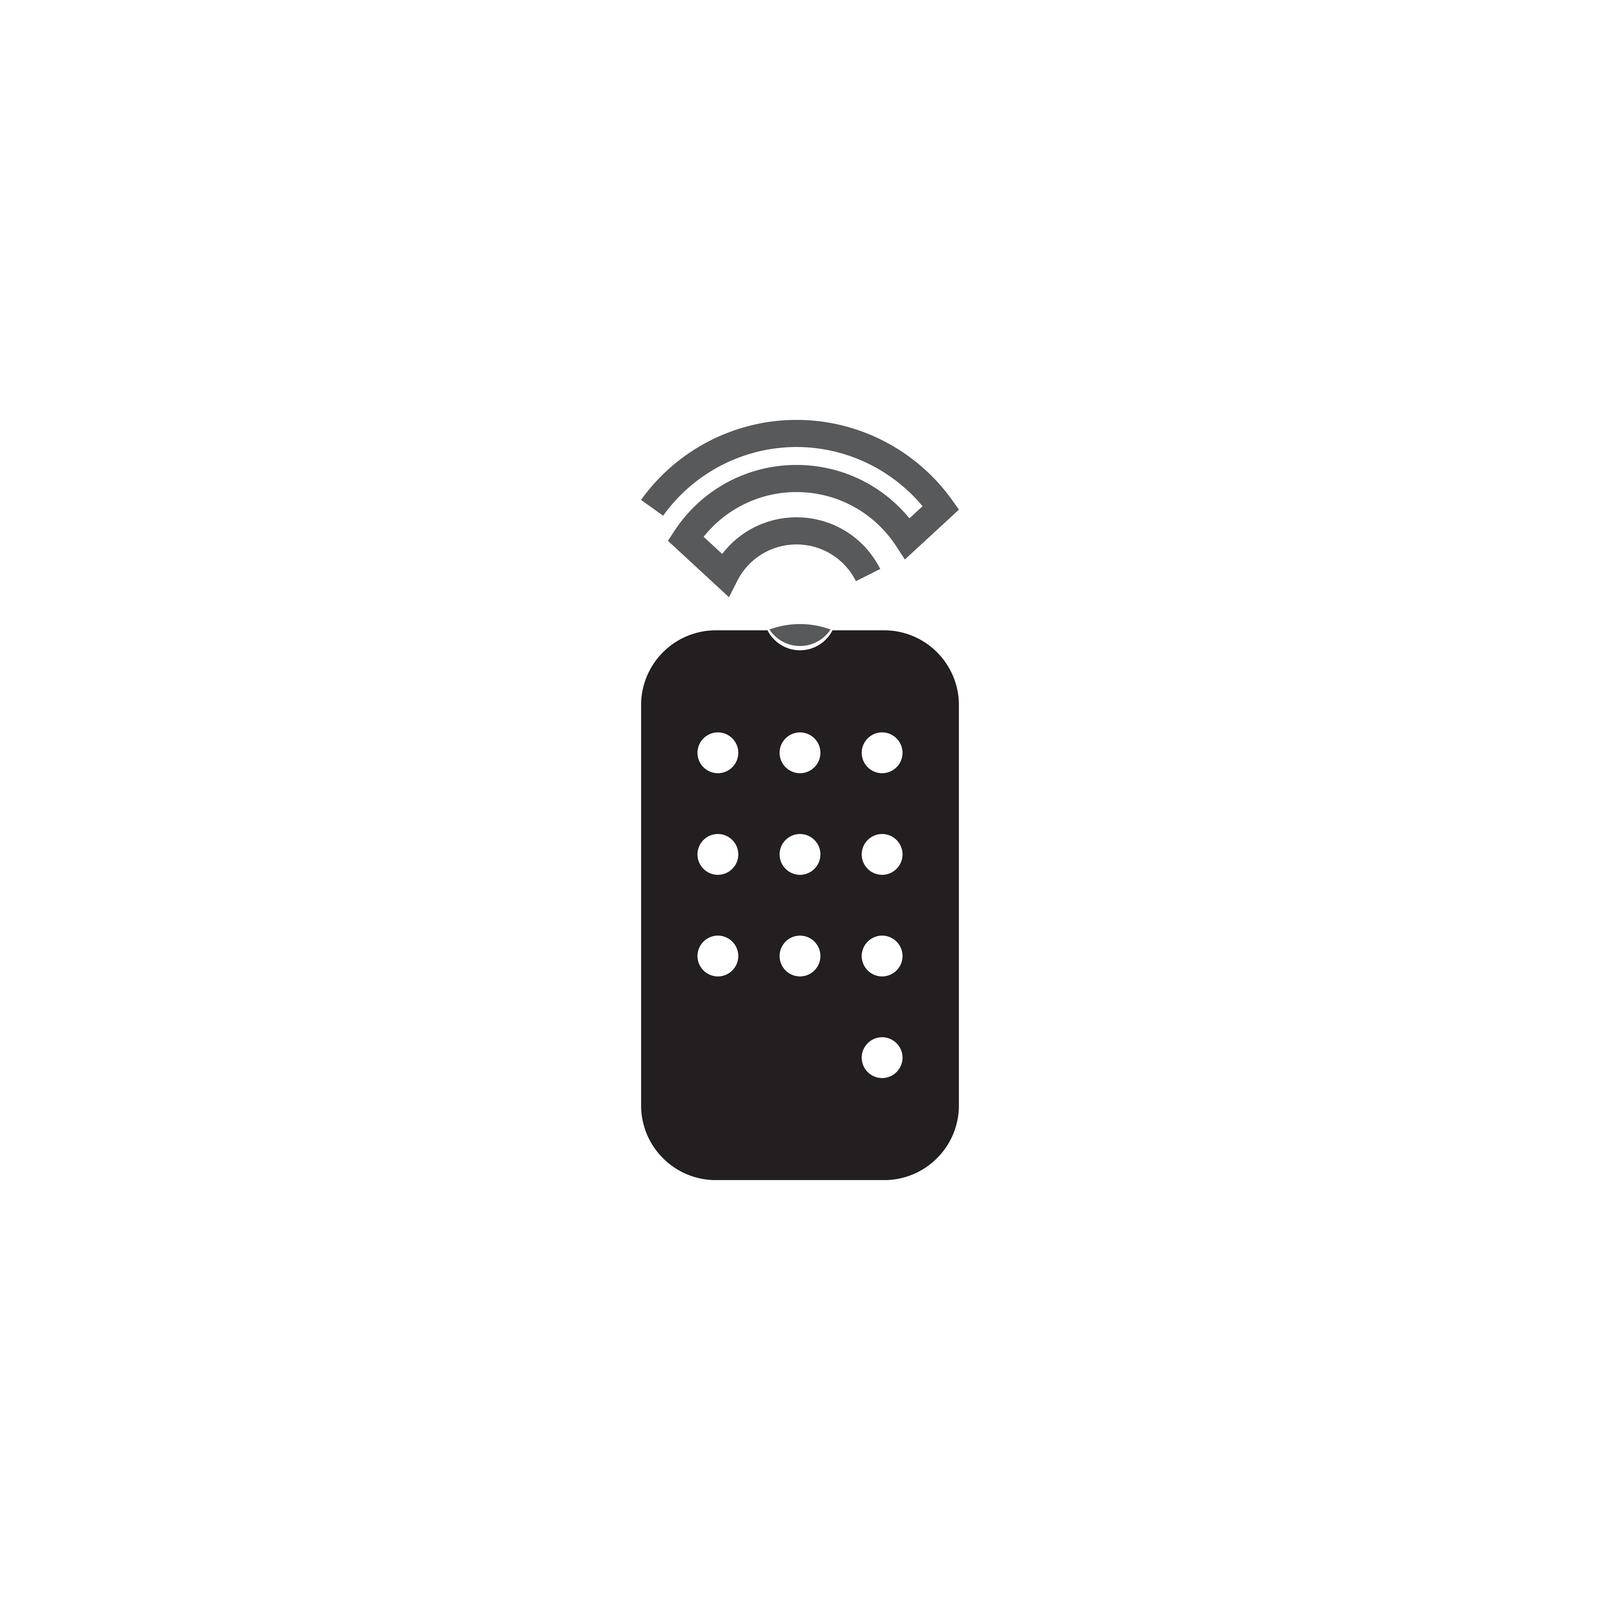 Remote icon by rnking